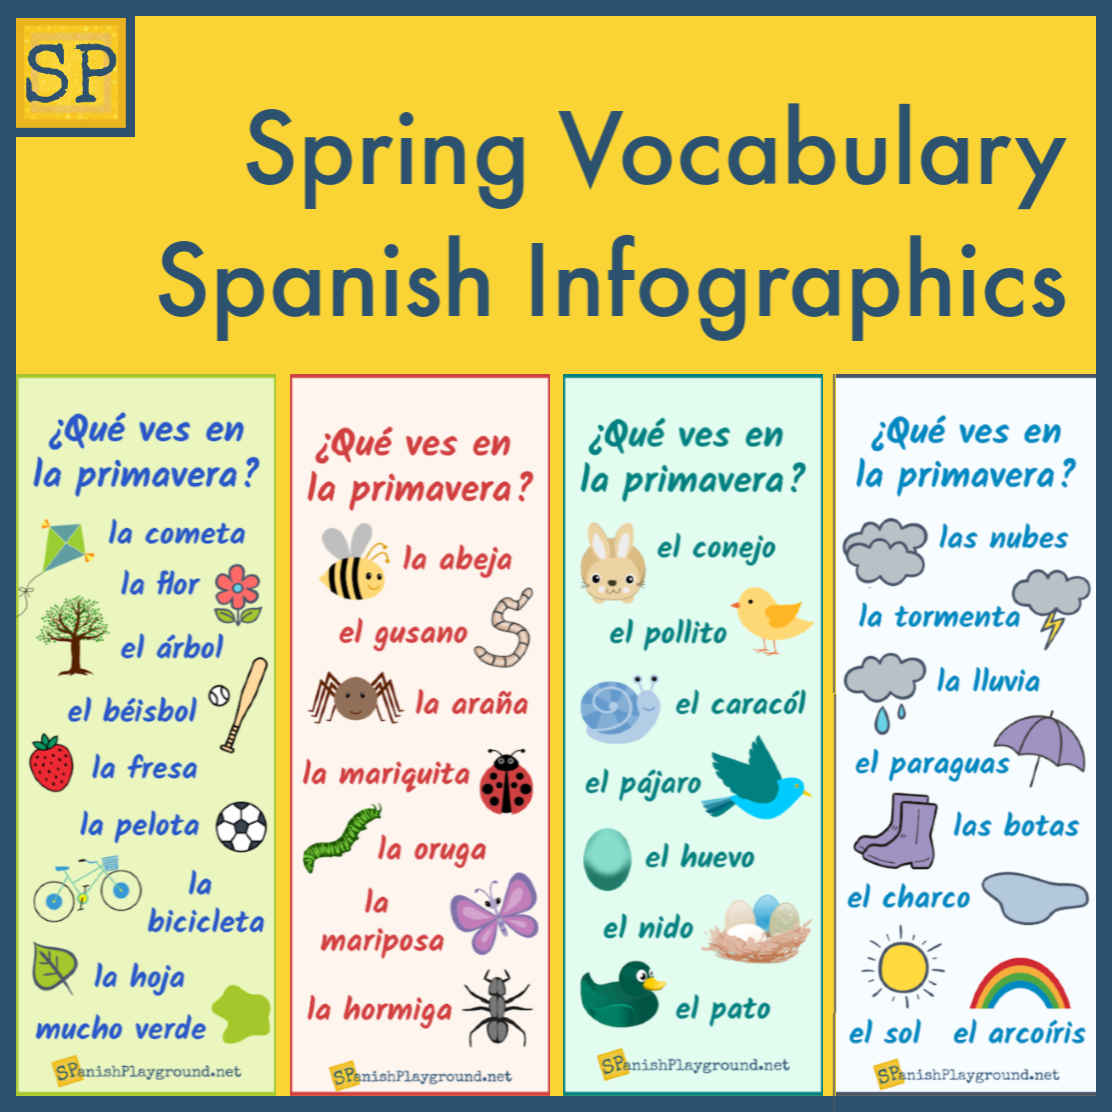 These are the four Spanish spring vocabulary infographics you can download.